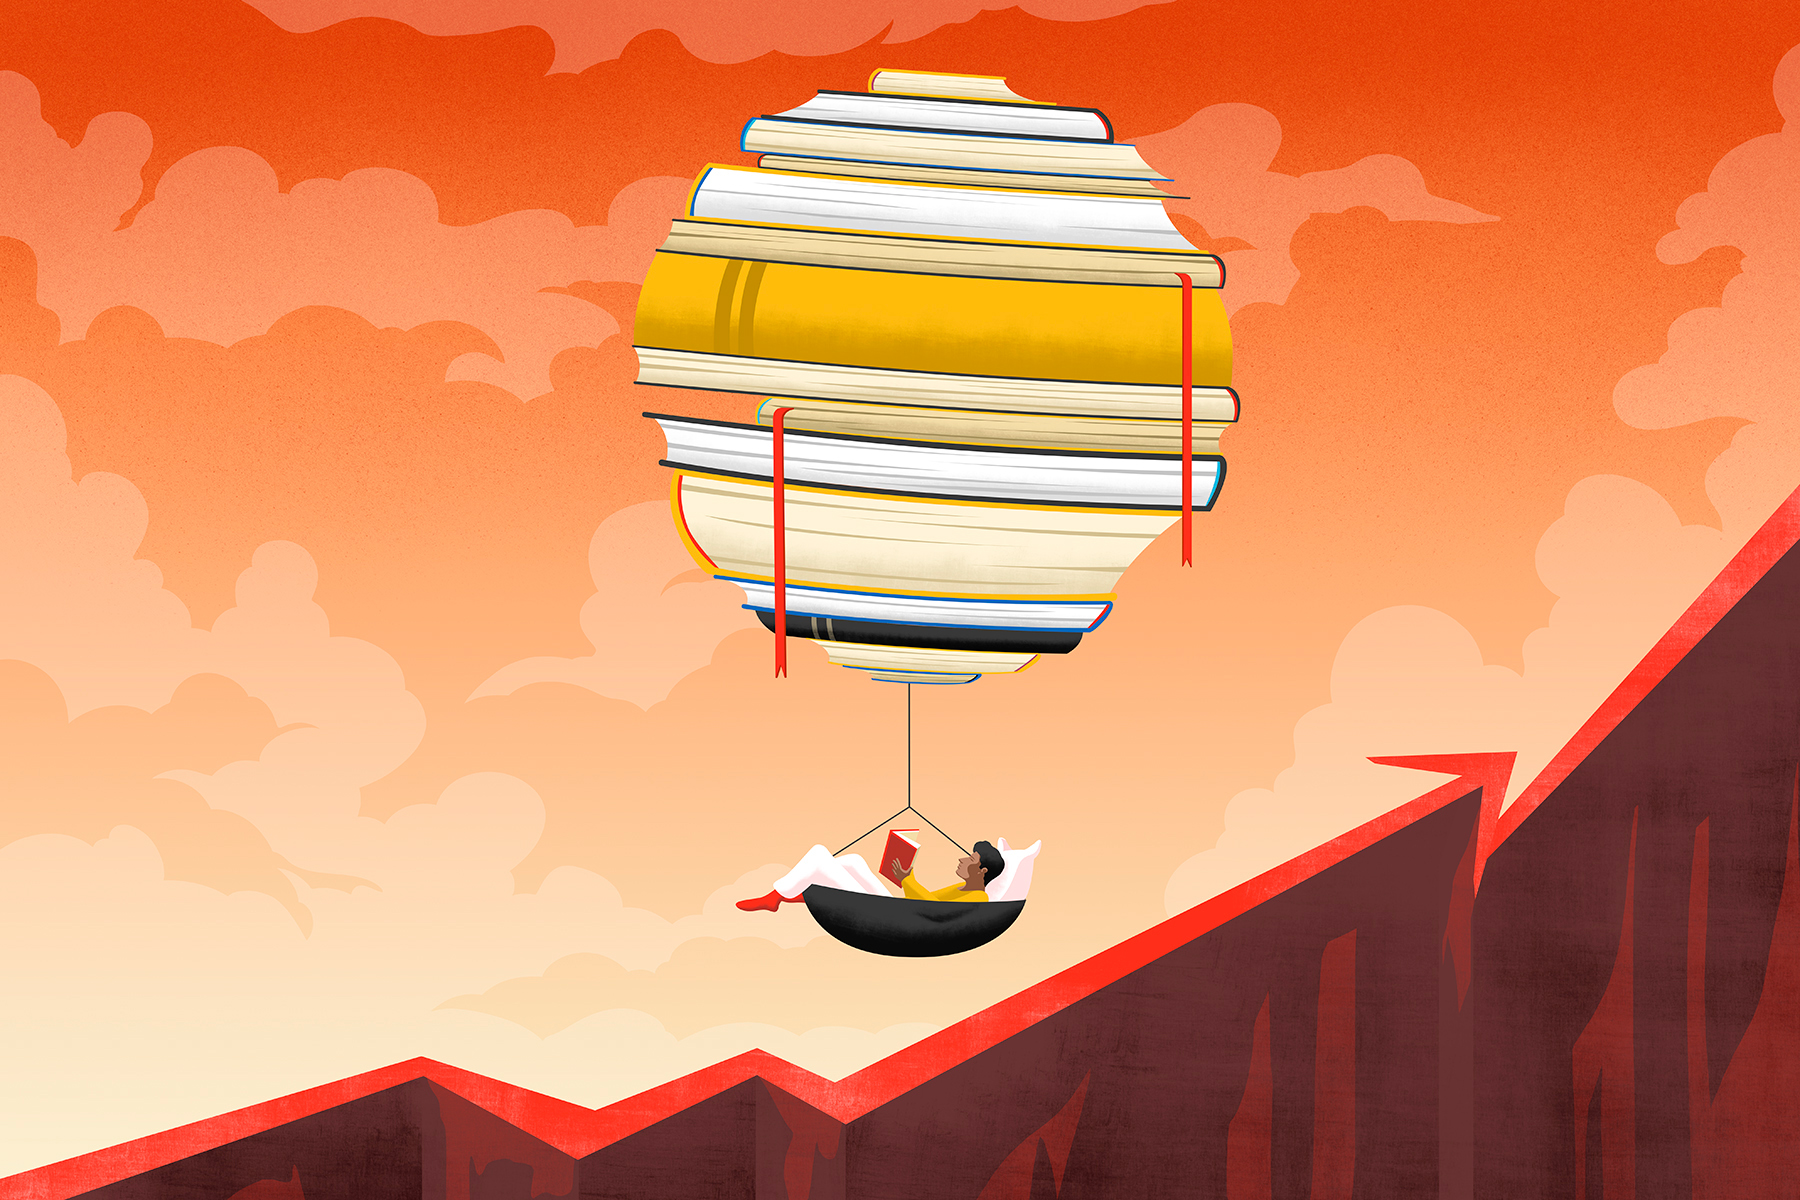 A drawing of a hot air balloon made of books stacked sideways drifting off against a mountain made of an statistical graph, sloping upwards